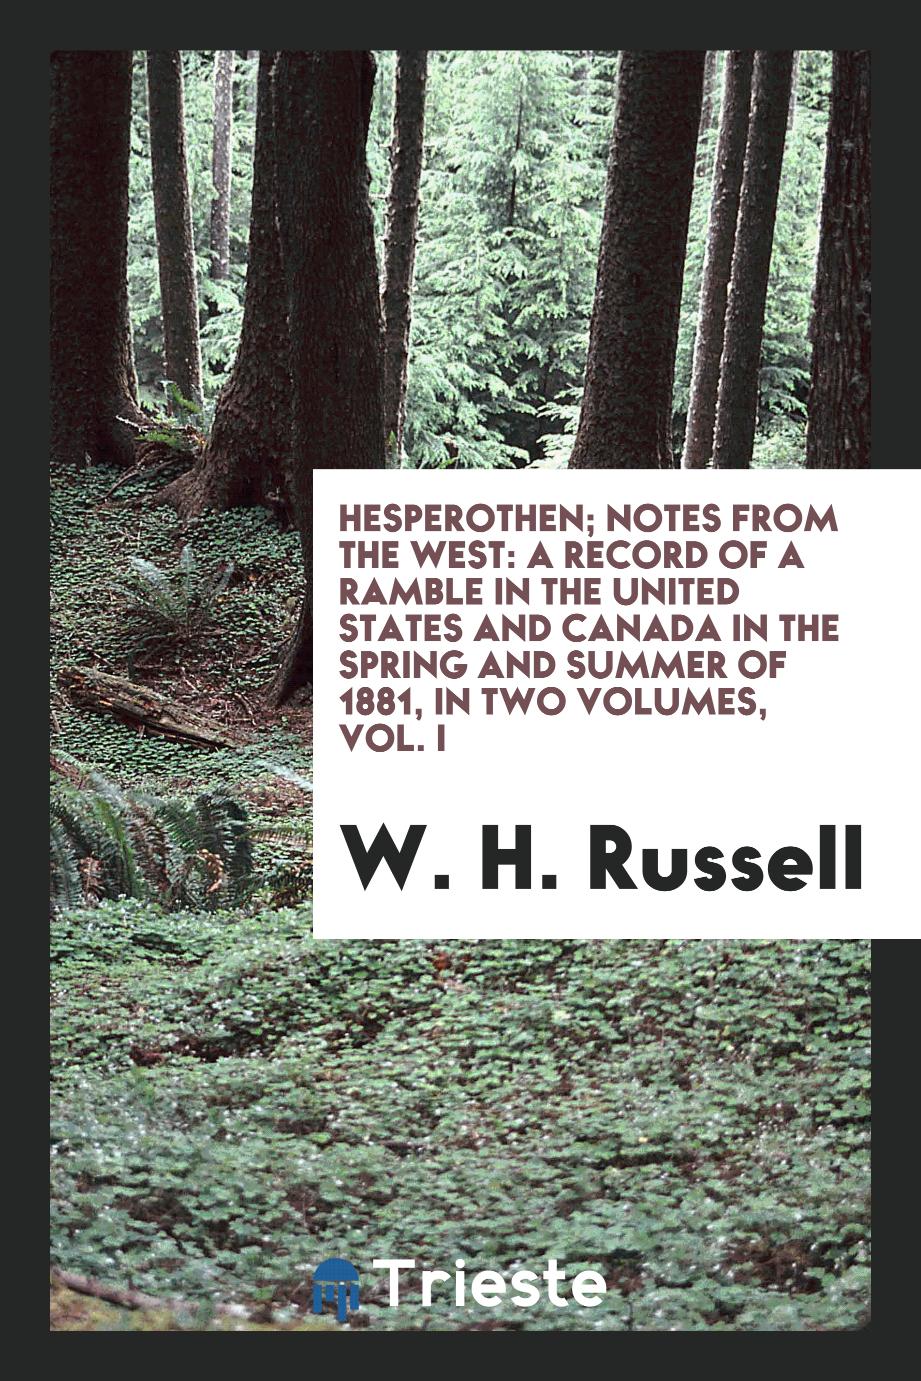 Hesperothen; Notes from the West: a record of a ramble in the United States and Canada in the spring and summer of 1881, in two volumes, Vol. I